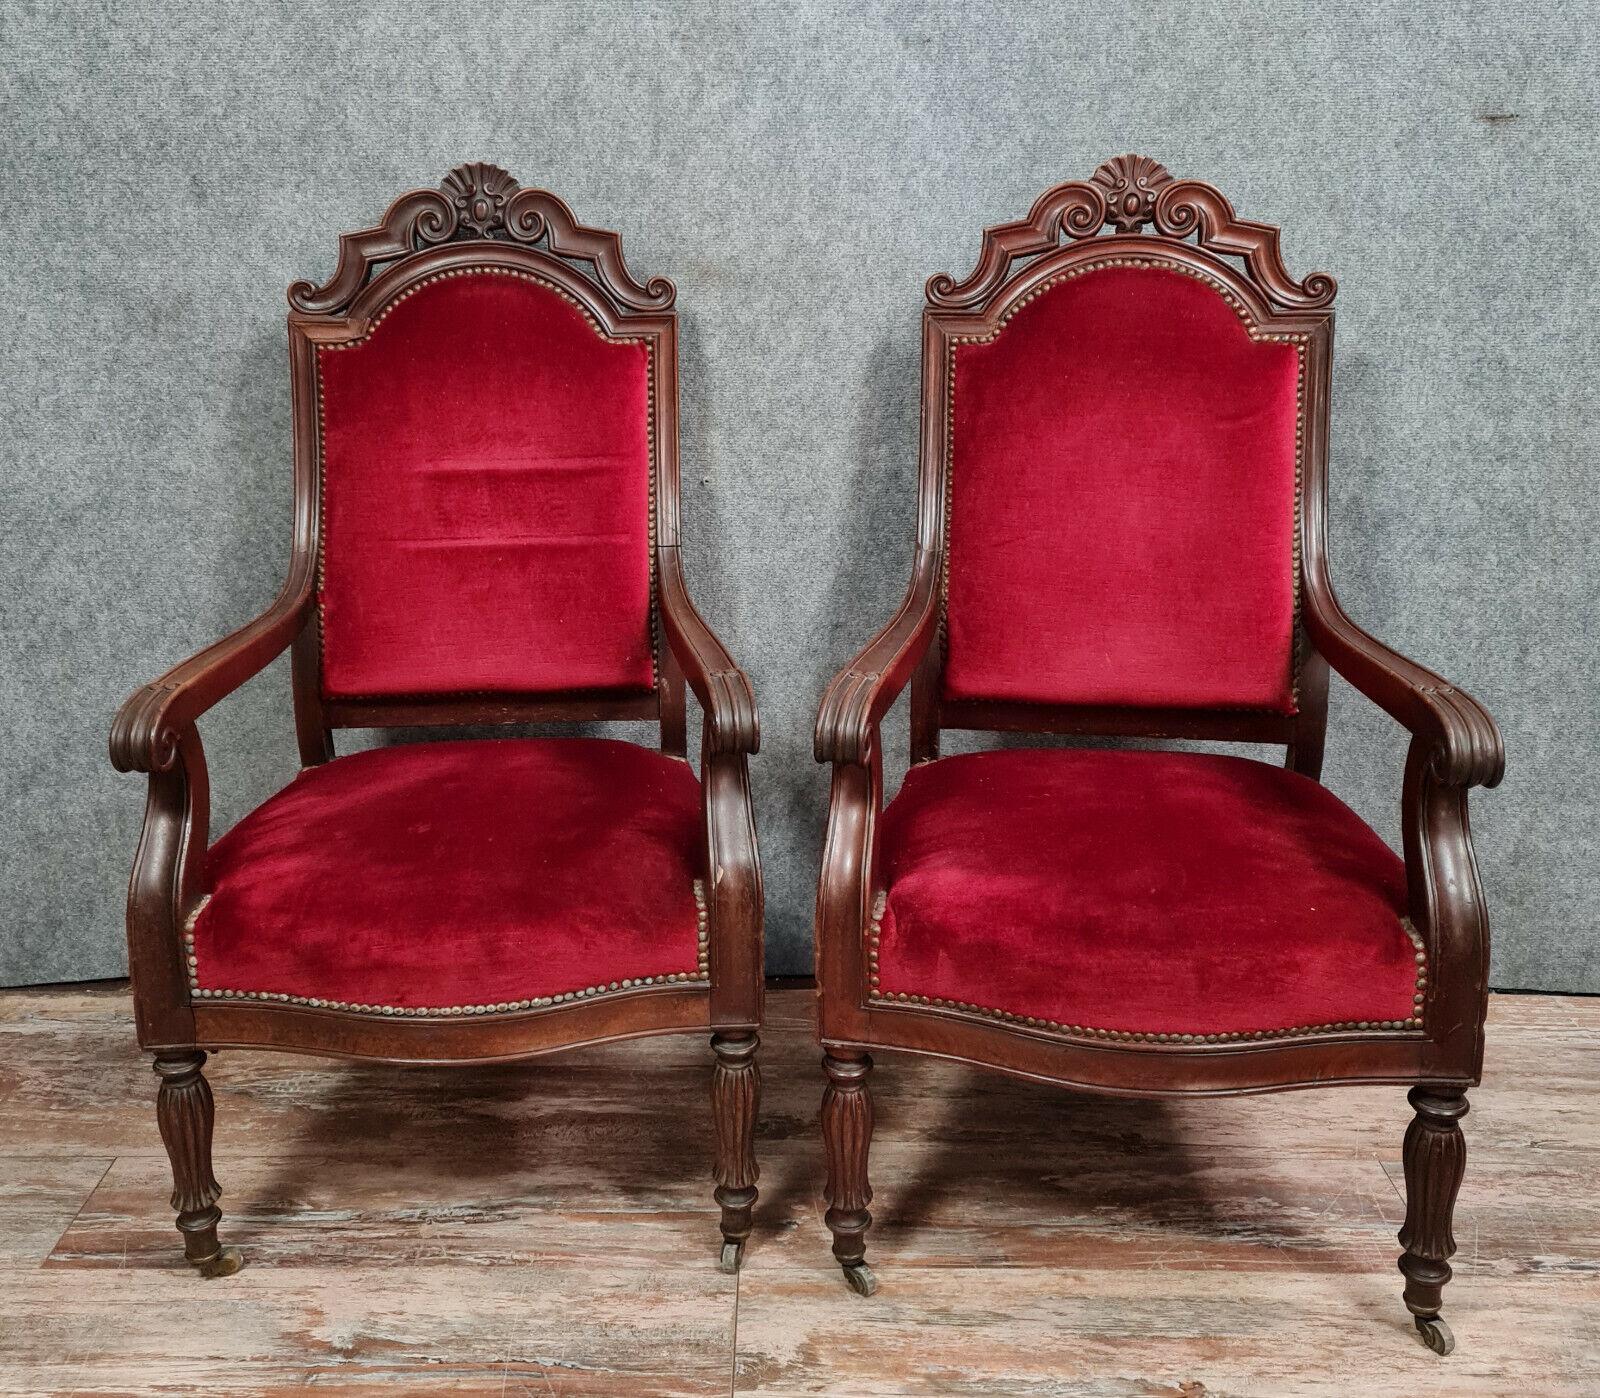 Exquisite Set of 4 Restauration Period Mahogany Chairs, circa 1820 -1X32 For Sale 1